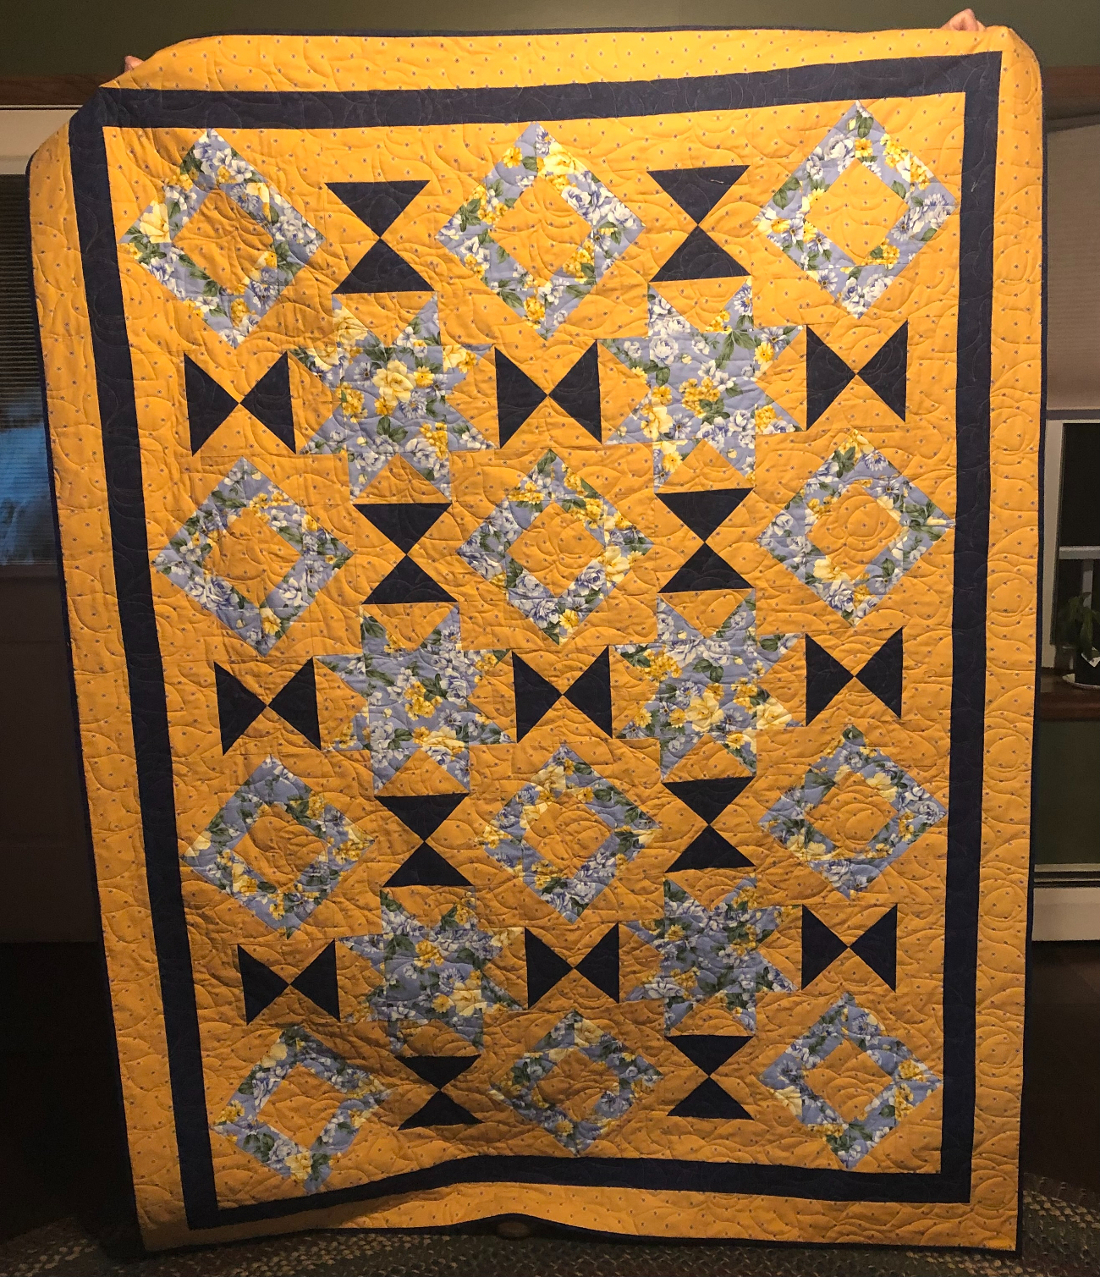 Cindy's Mystery Quilt